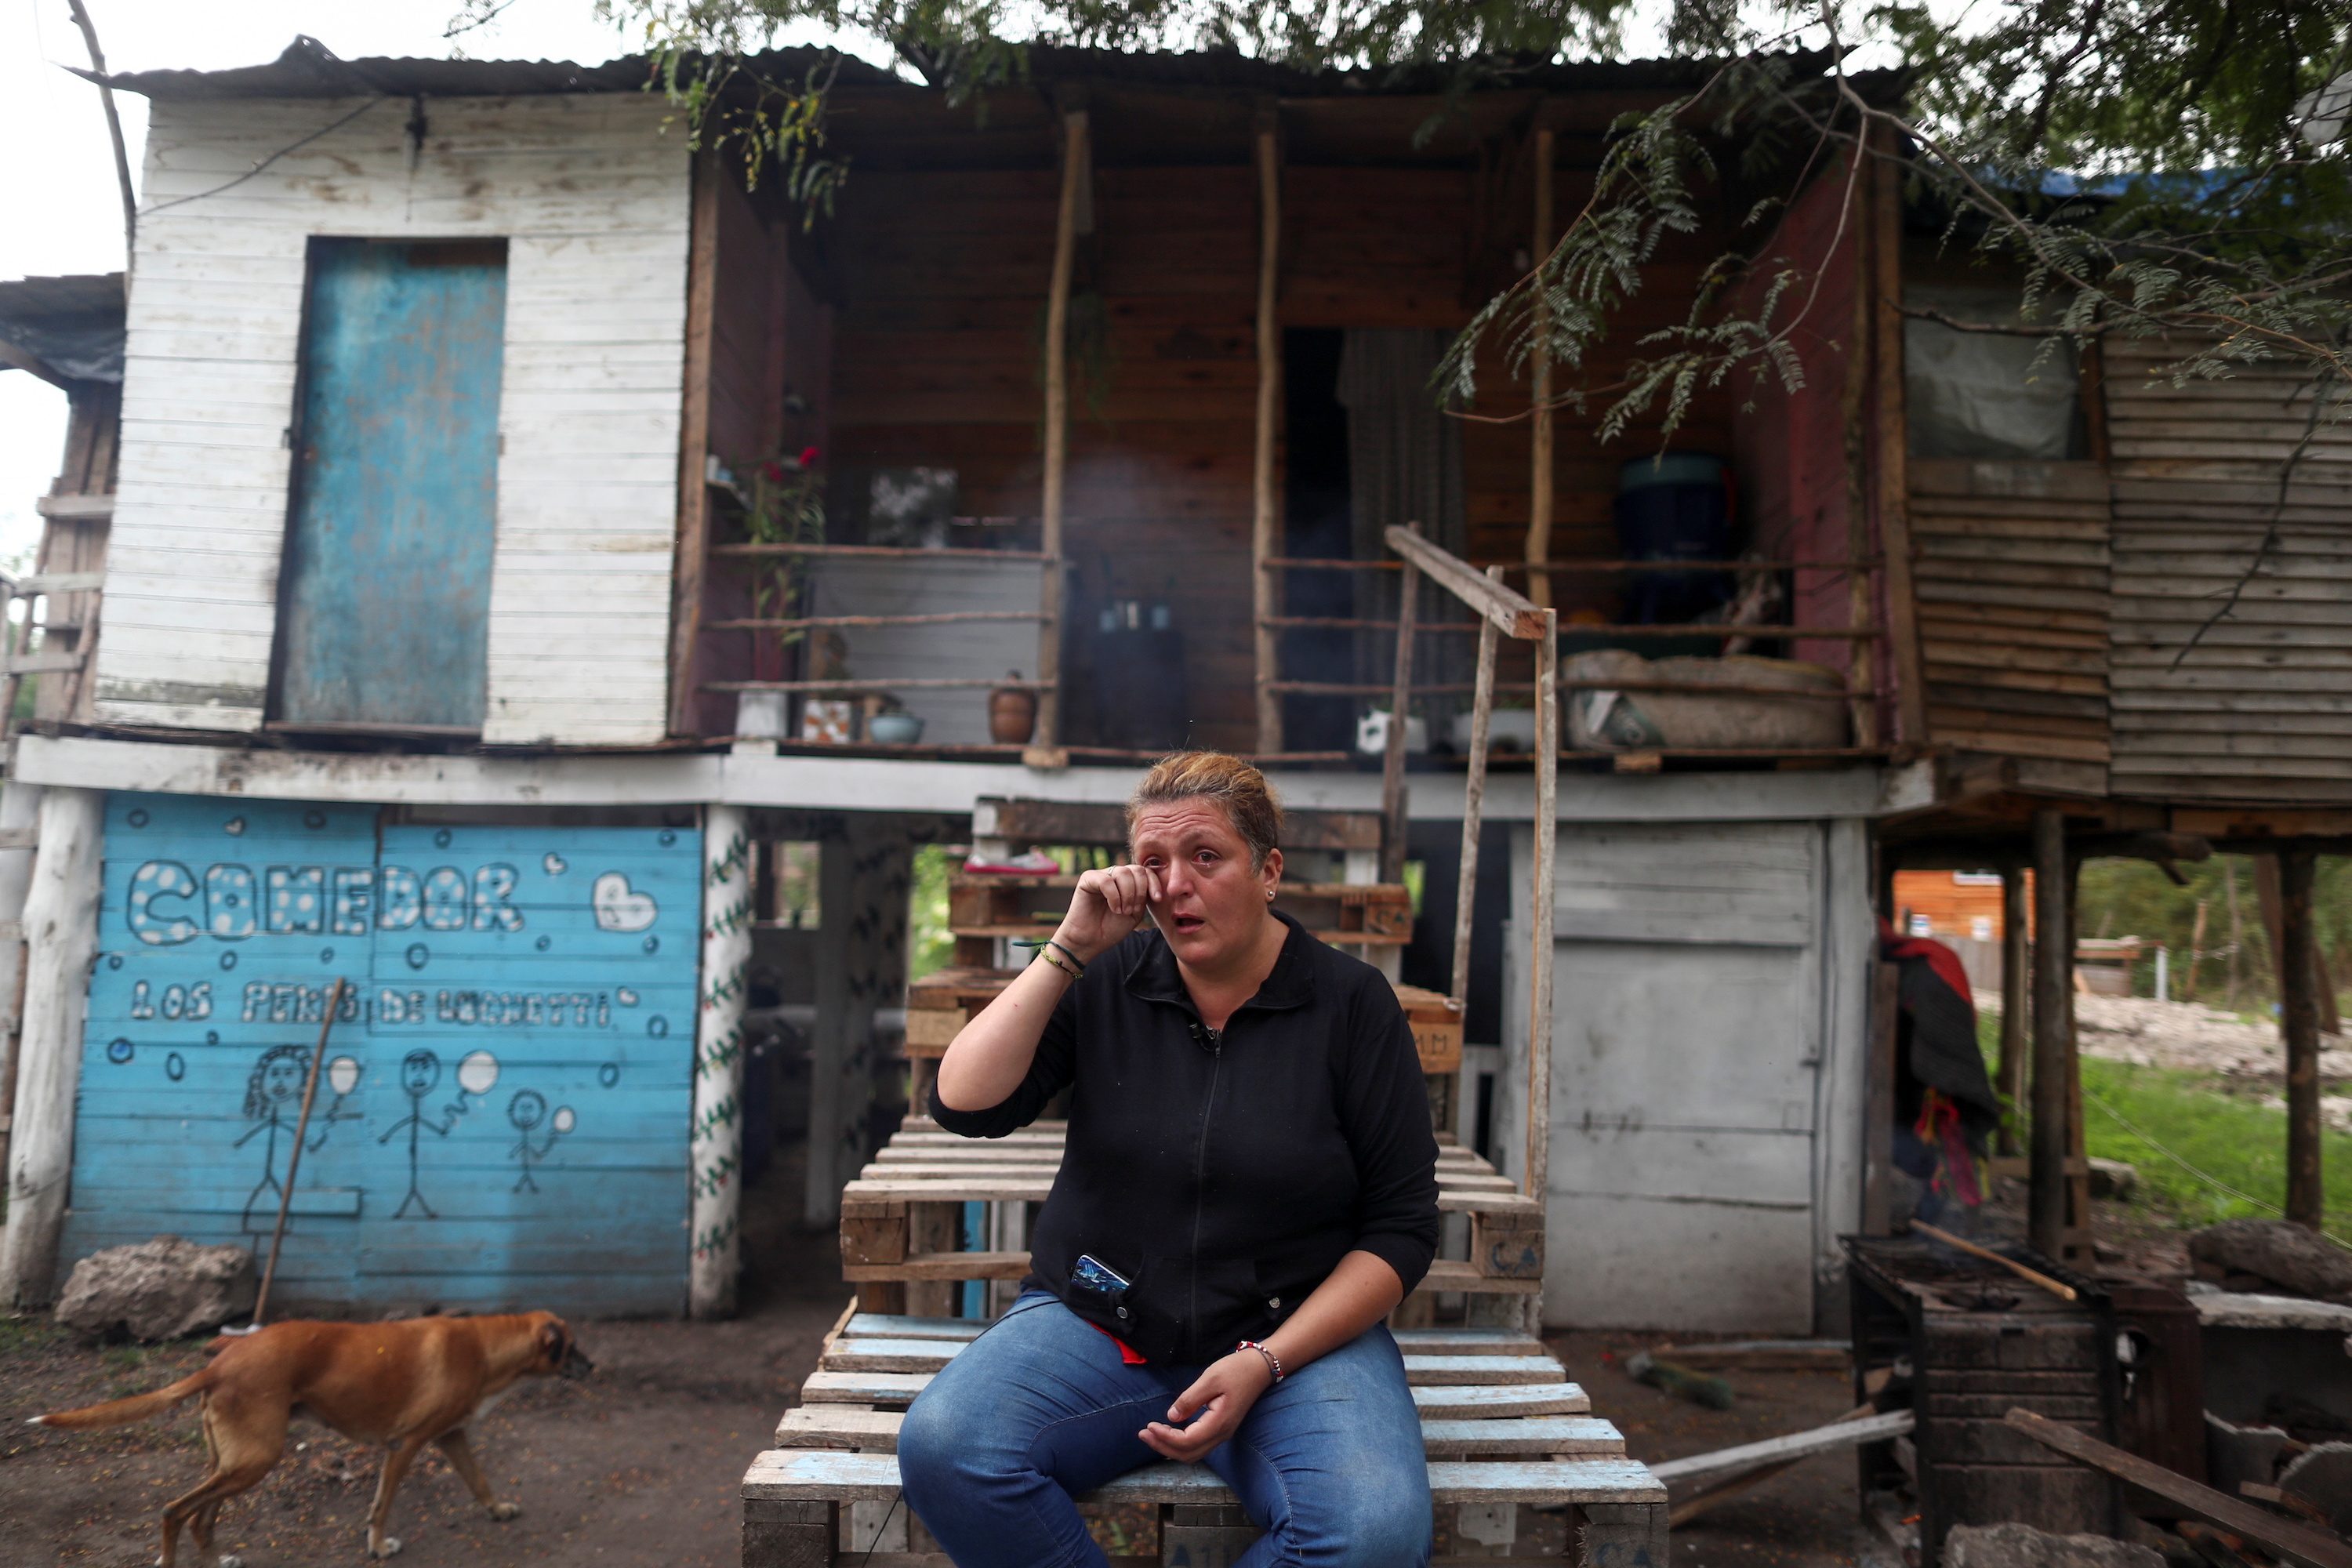 Argentine town bears scars of poverty as pandemic sharpens economic crisis